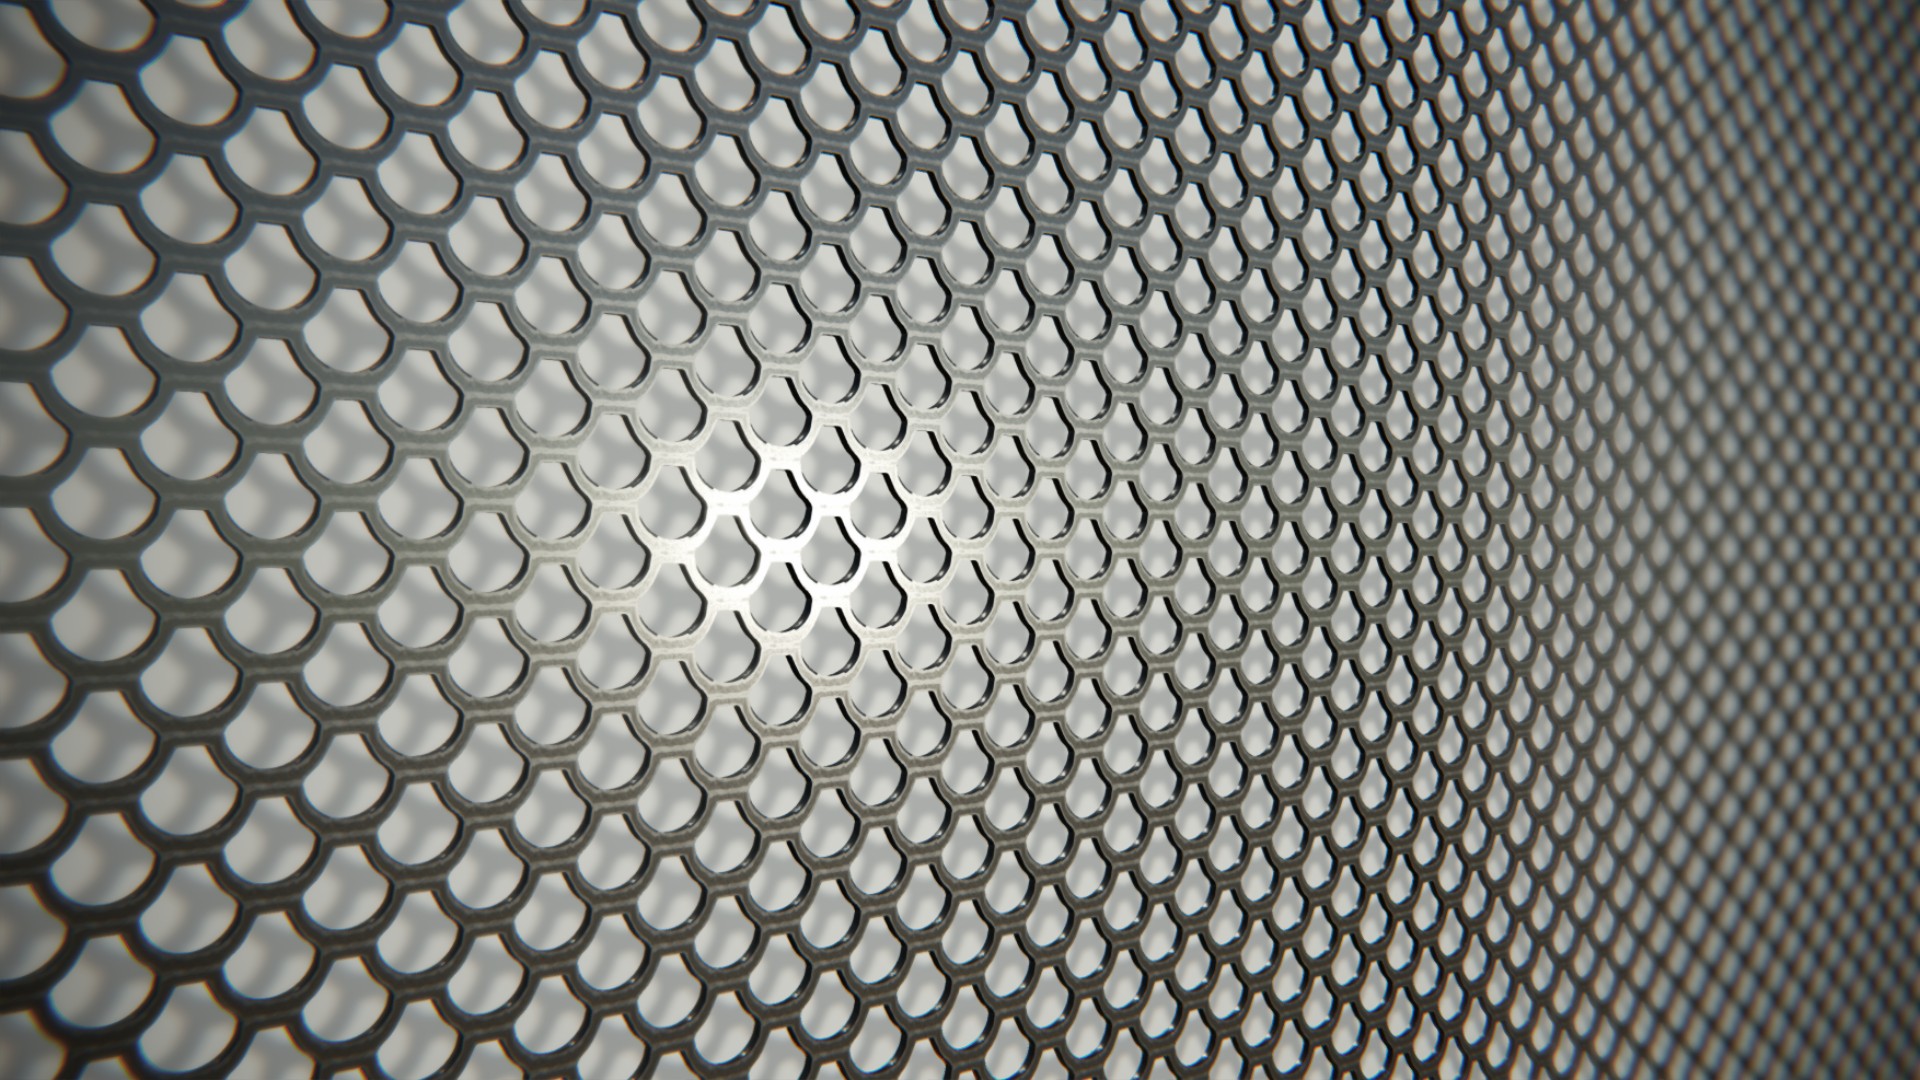 Experf – an alternative to perforated metal